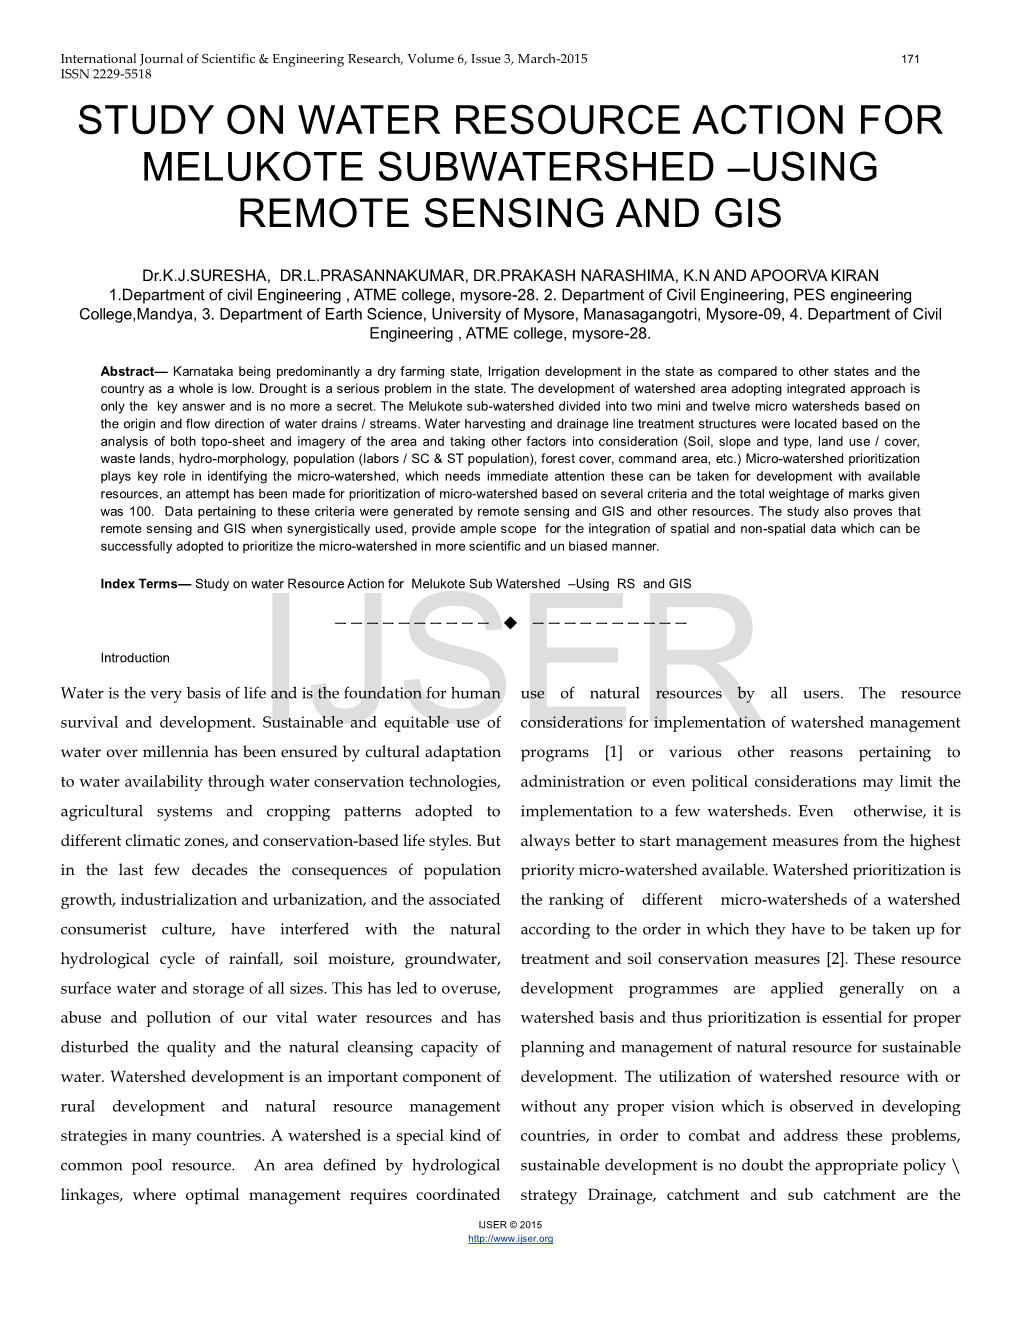 Study on Water Resource Action for Melukote Subwatershed –Using Remote Sensing and Gis